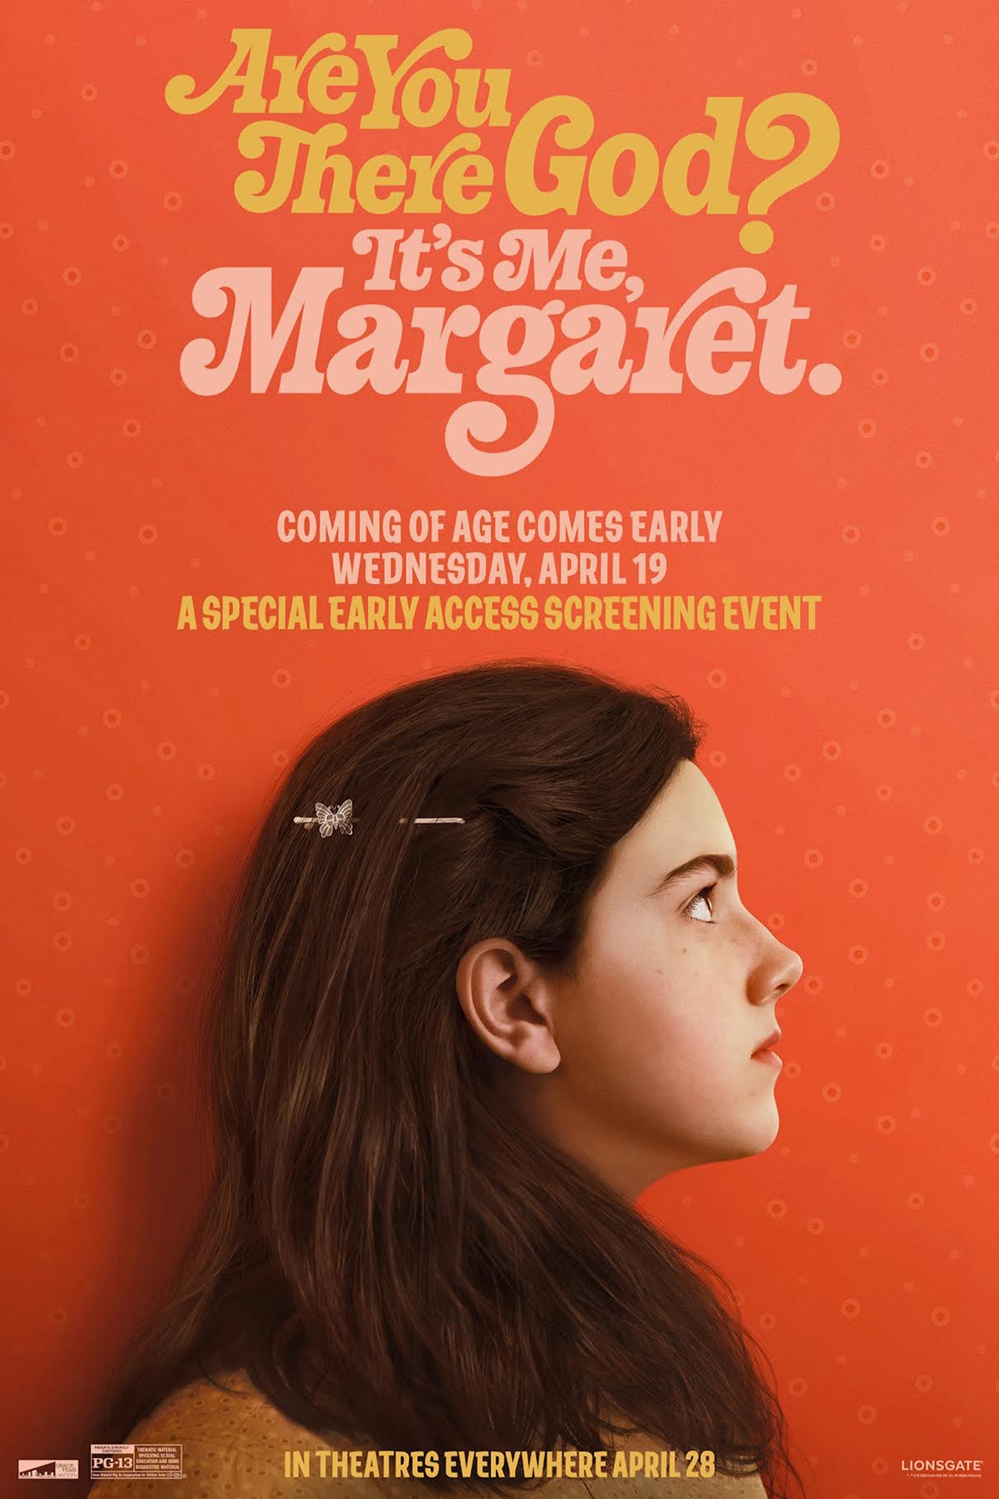 Are You There God? It's Me Margaret. Poster